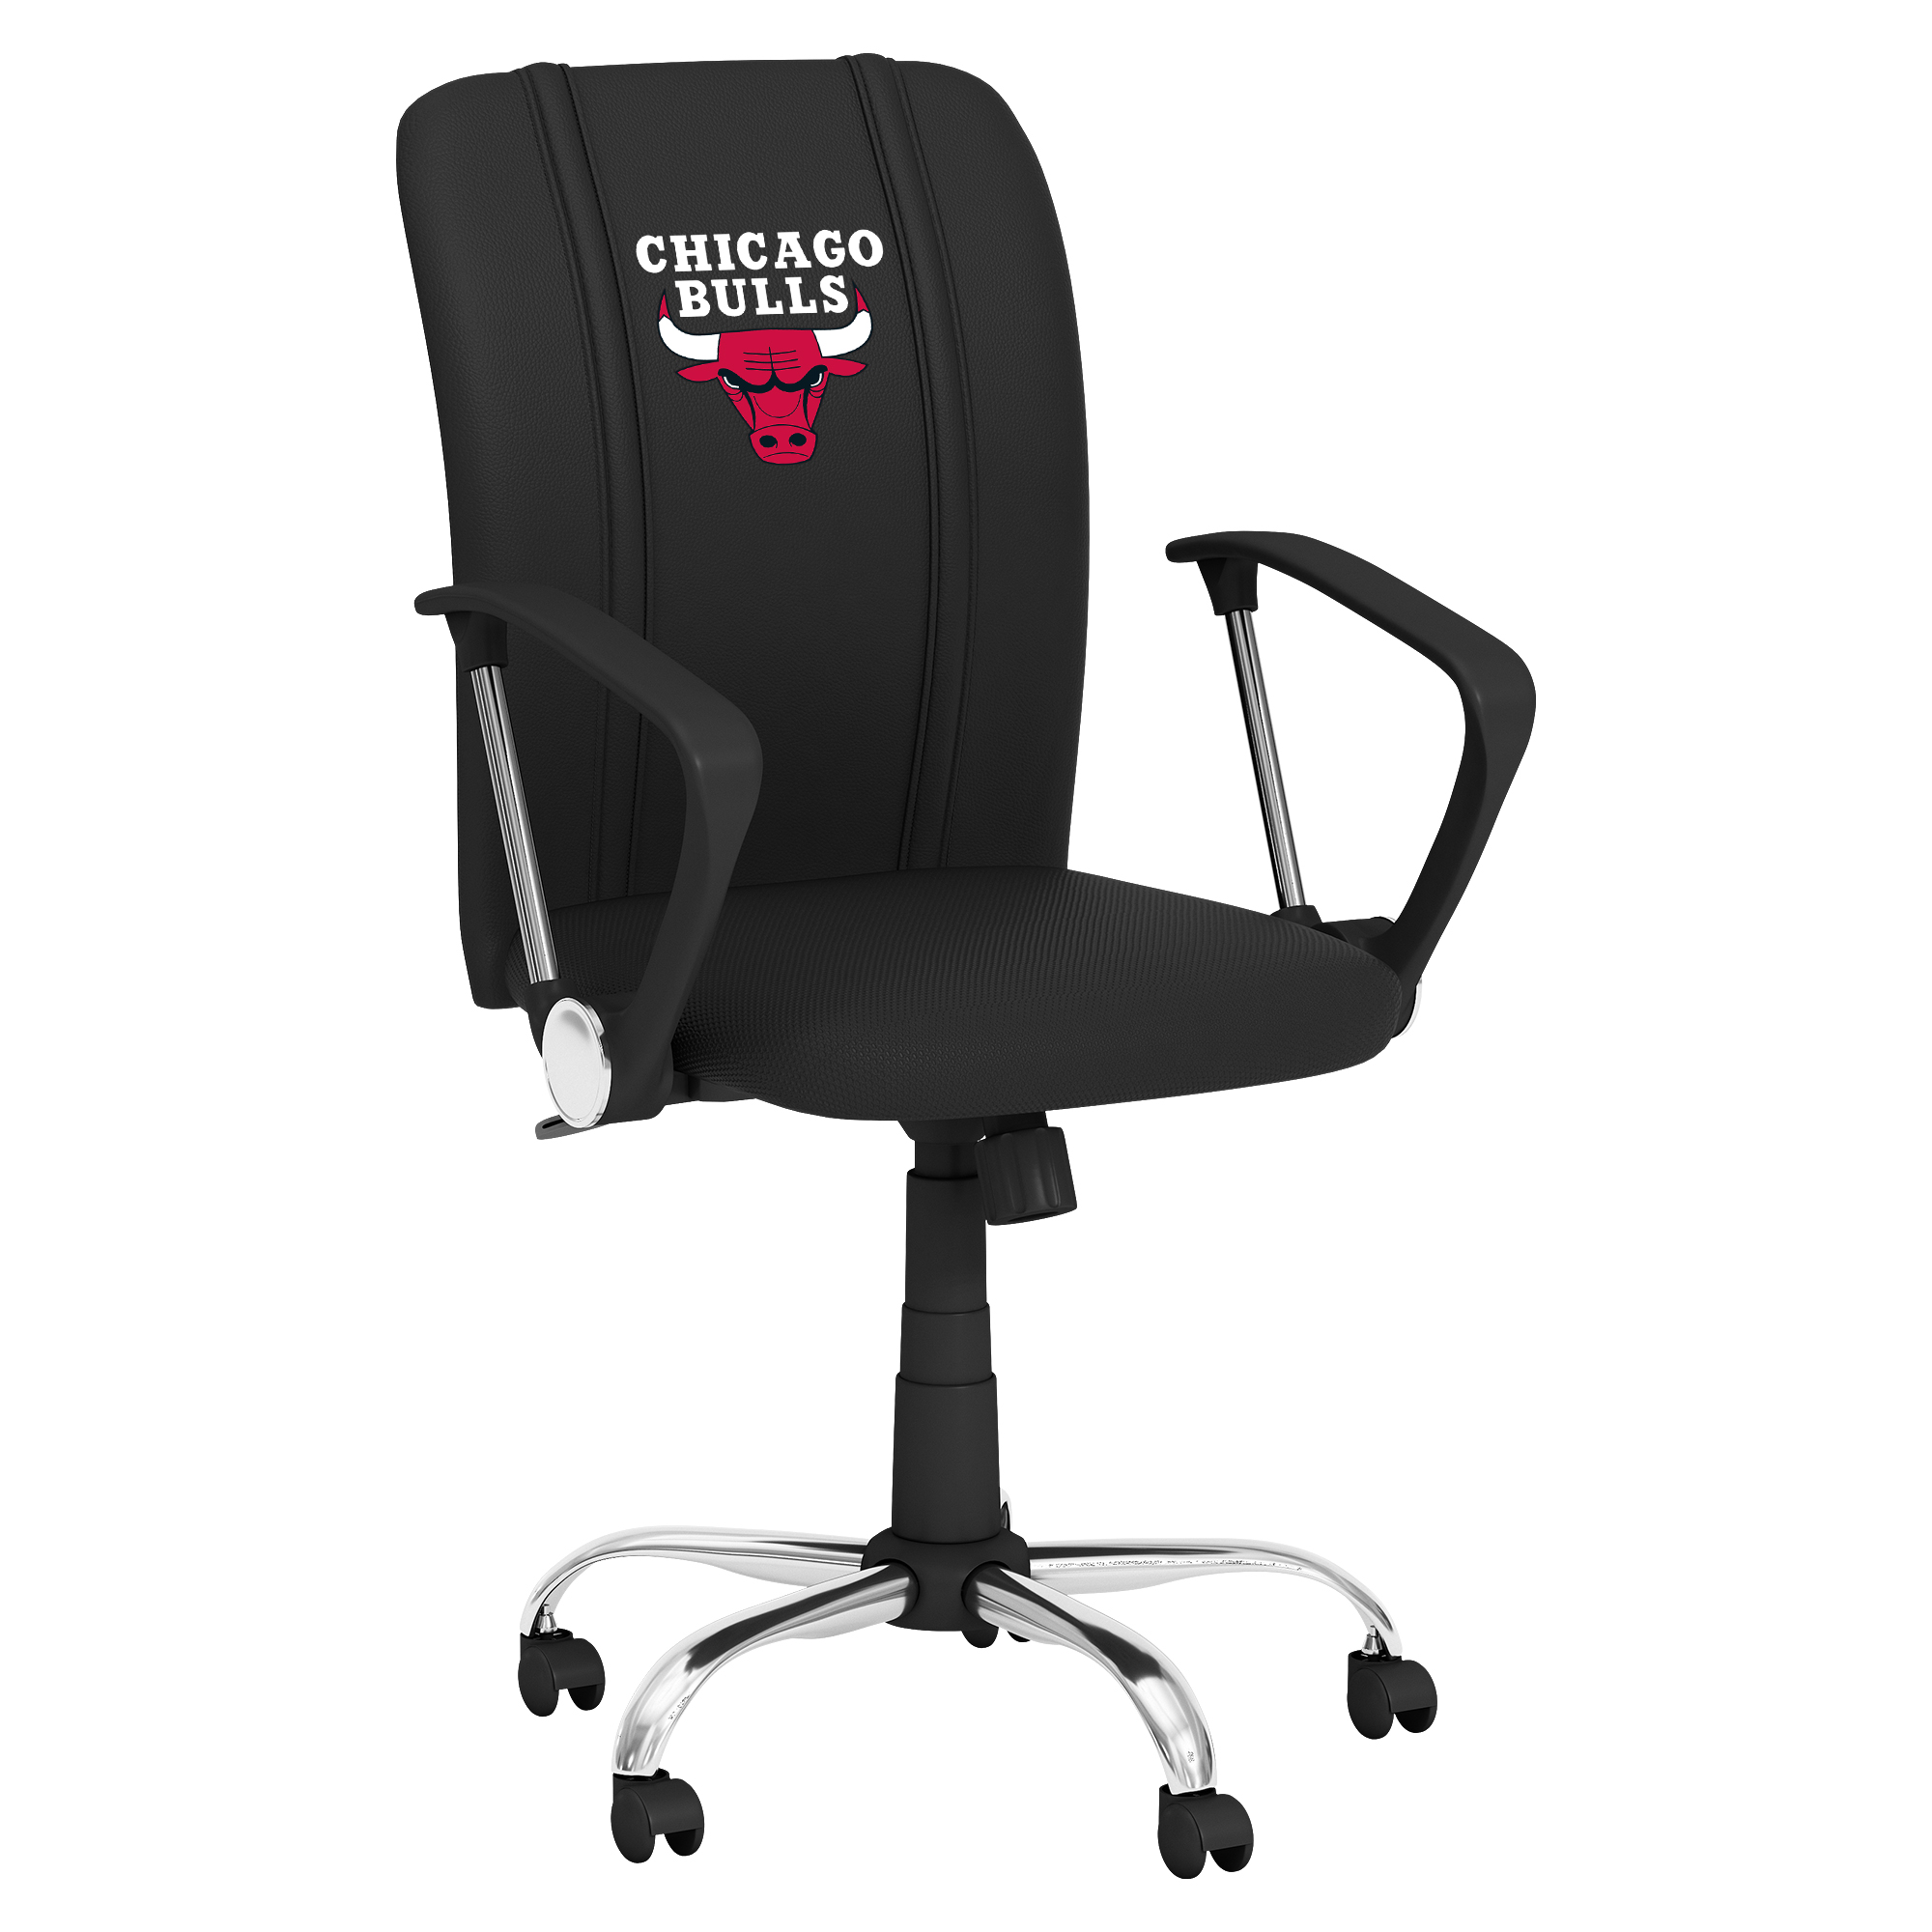 Chicago Bulls Curve Task Chair with Chicago Bulls Logo